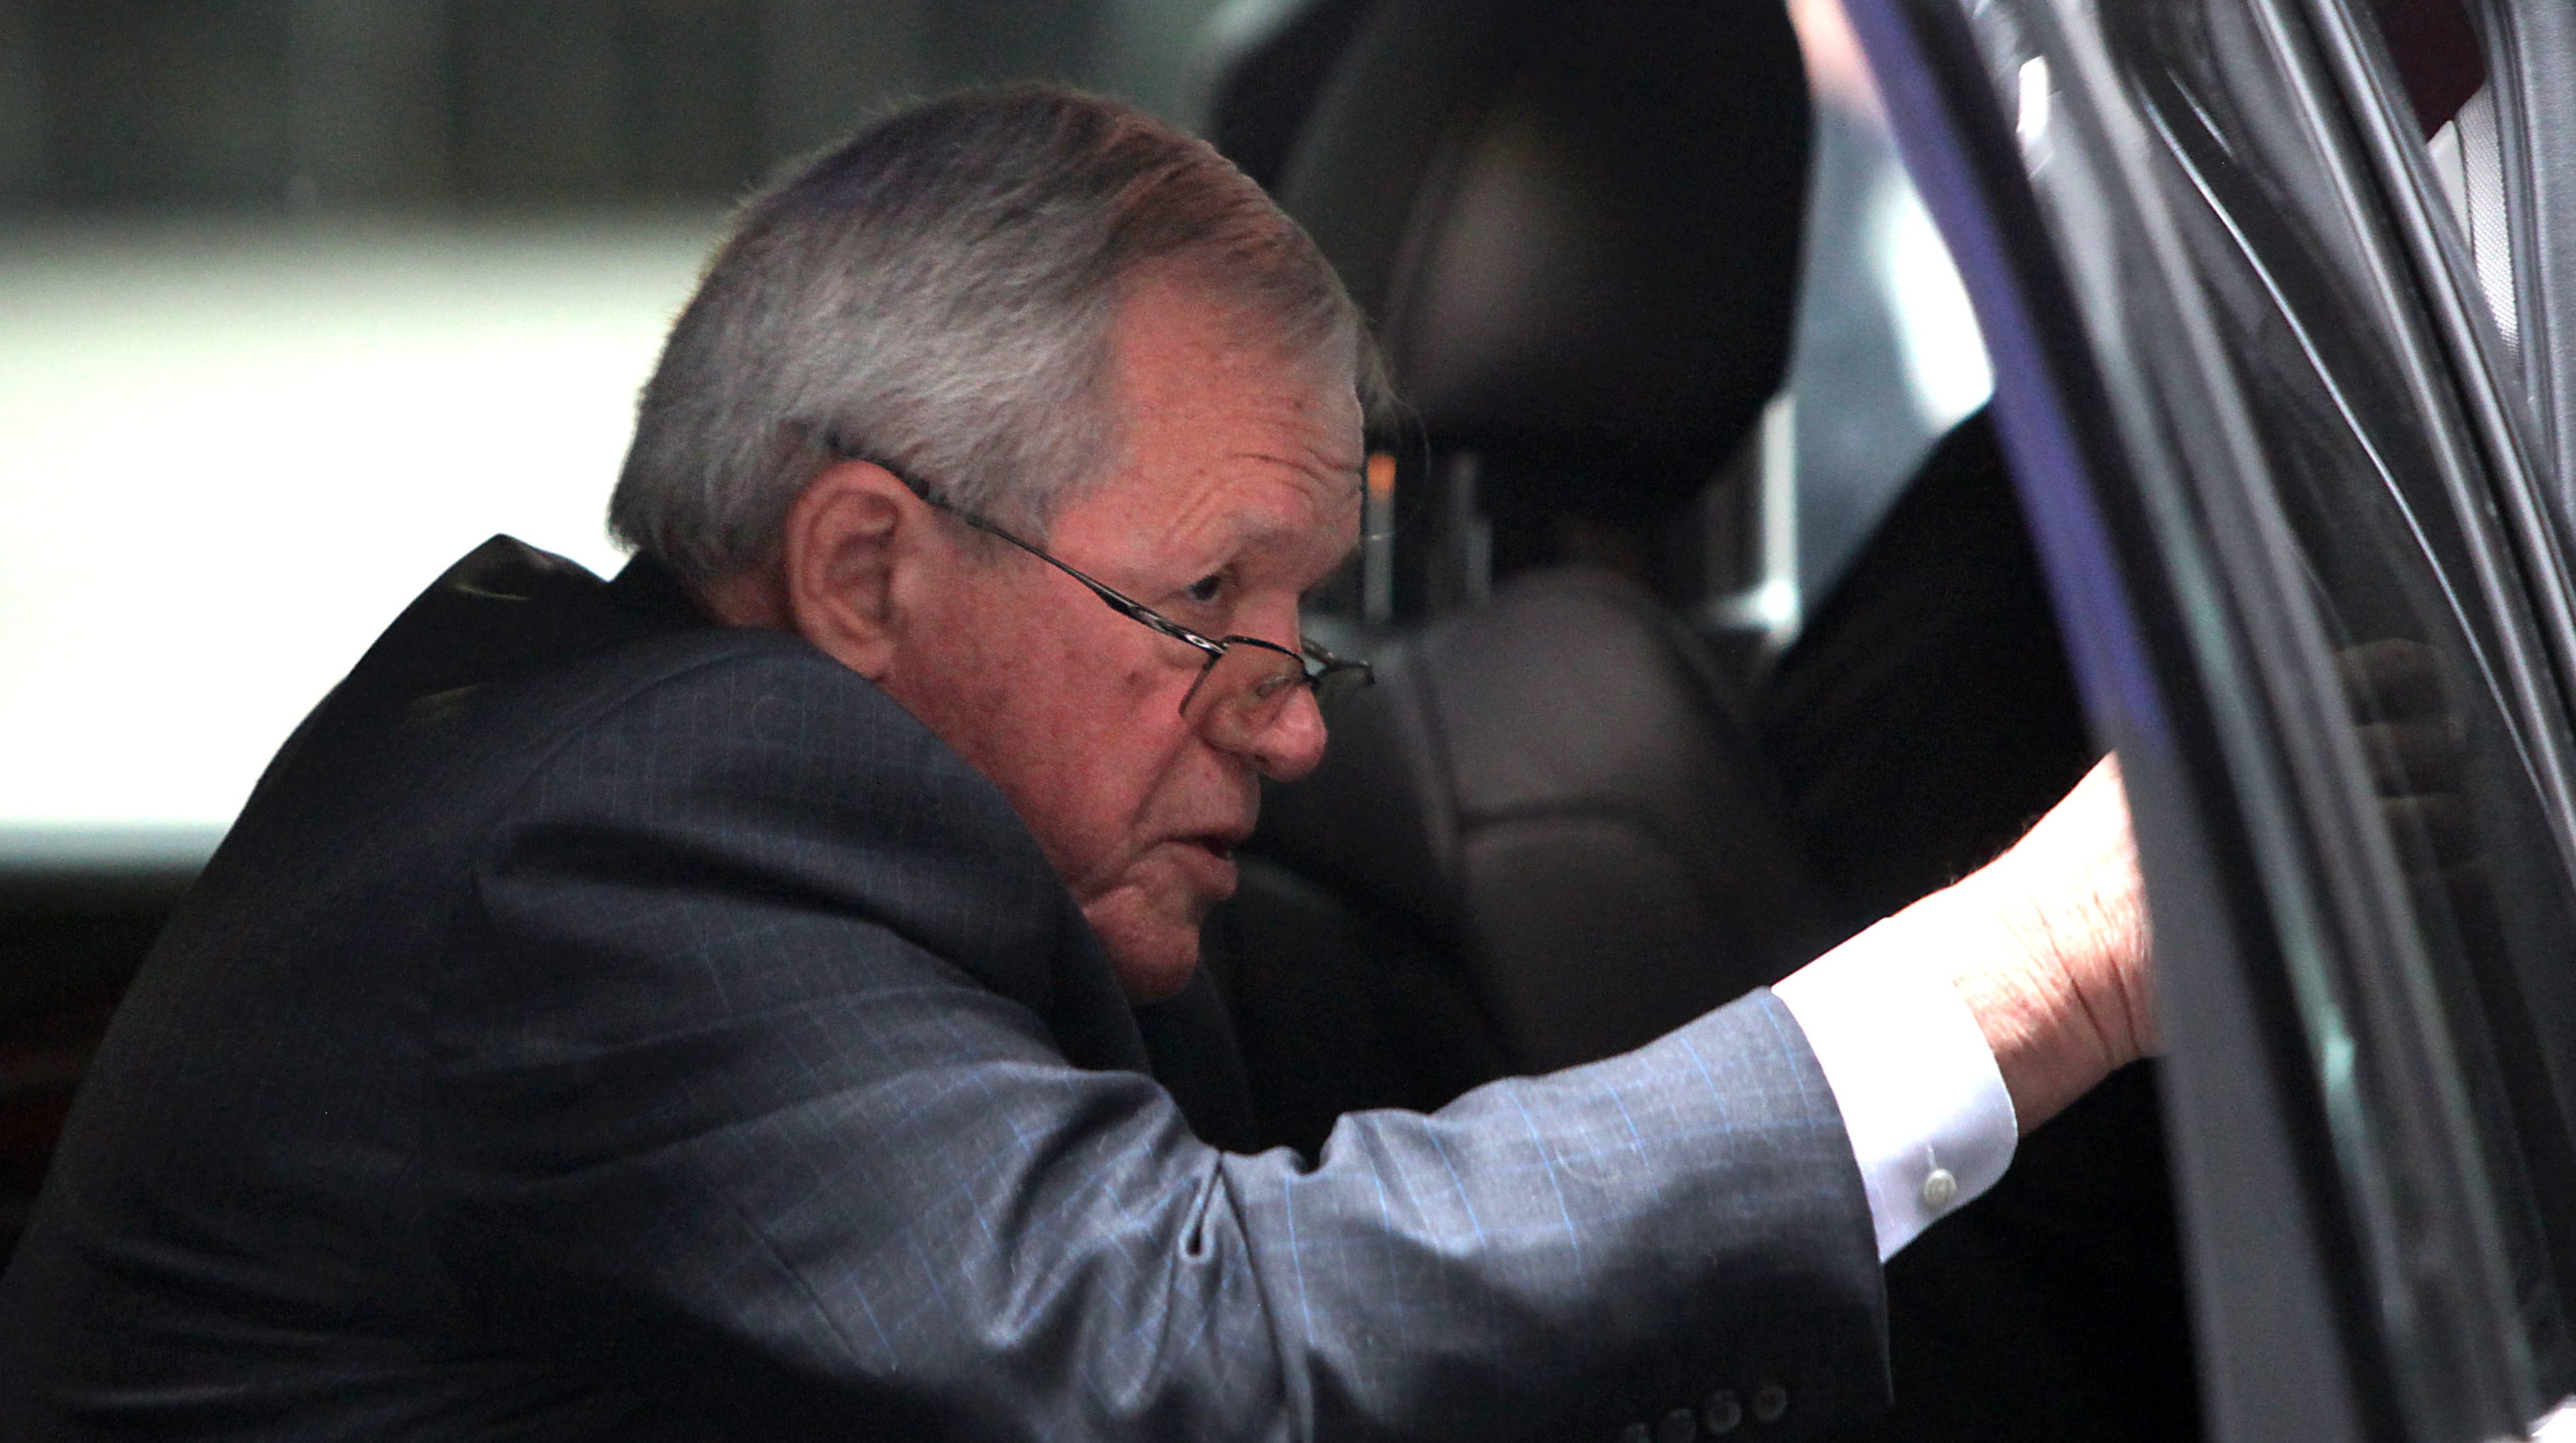 Former House Speaker Dennis Hastert arrives at the Dirksen Federal Court House for his hush-money case sentencing on April 27, 2016 in Chicago, Illinois. (Getty)